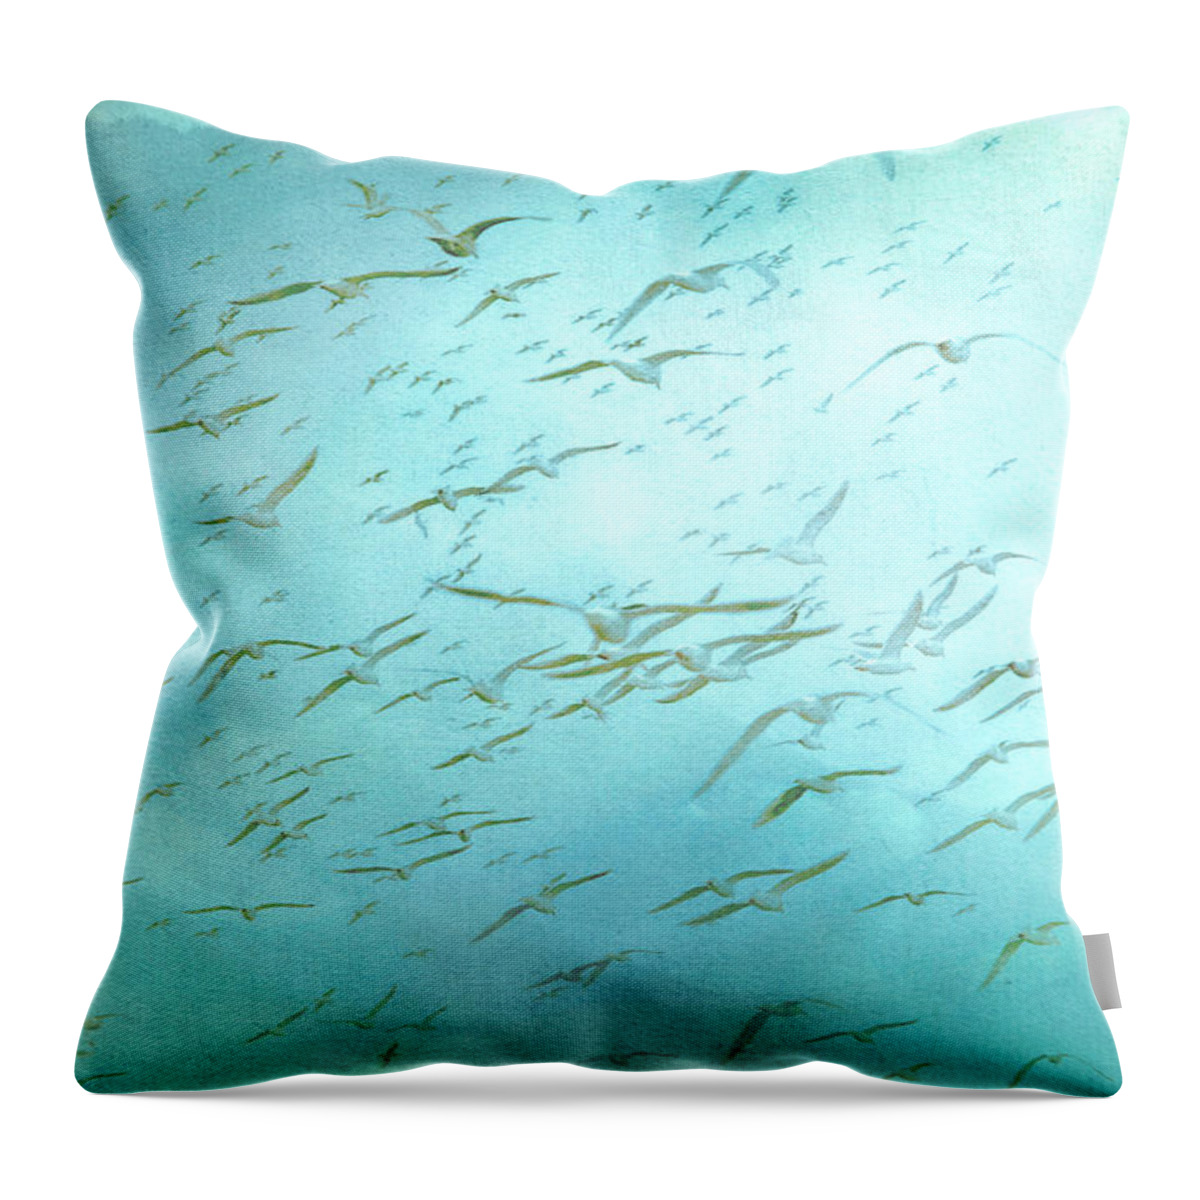 Seagulls Throw Pillow featuring the photograph Seagulls on Teal Blue Background by Peggy Collins